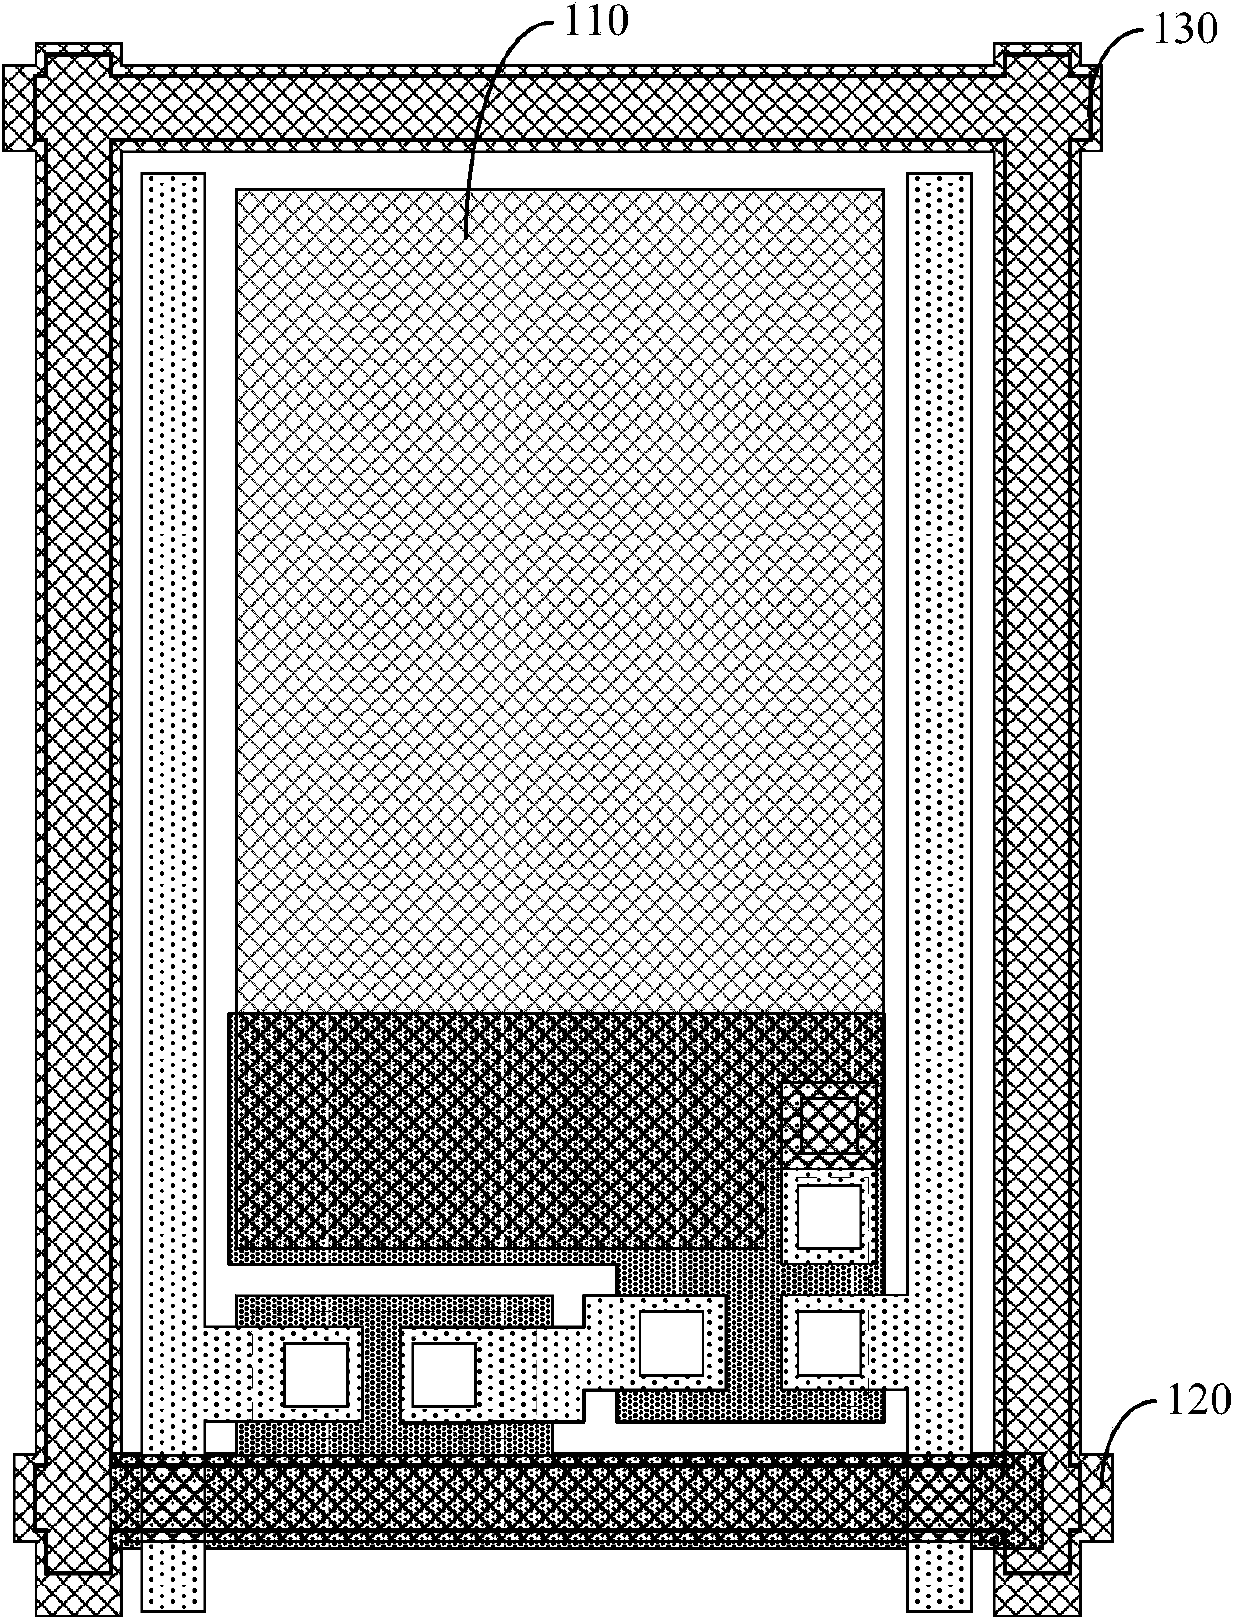 AMOLED array basal plate and display device